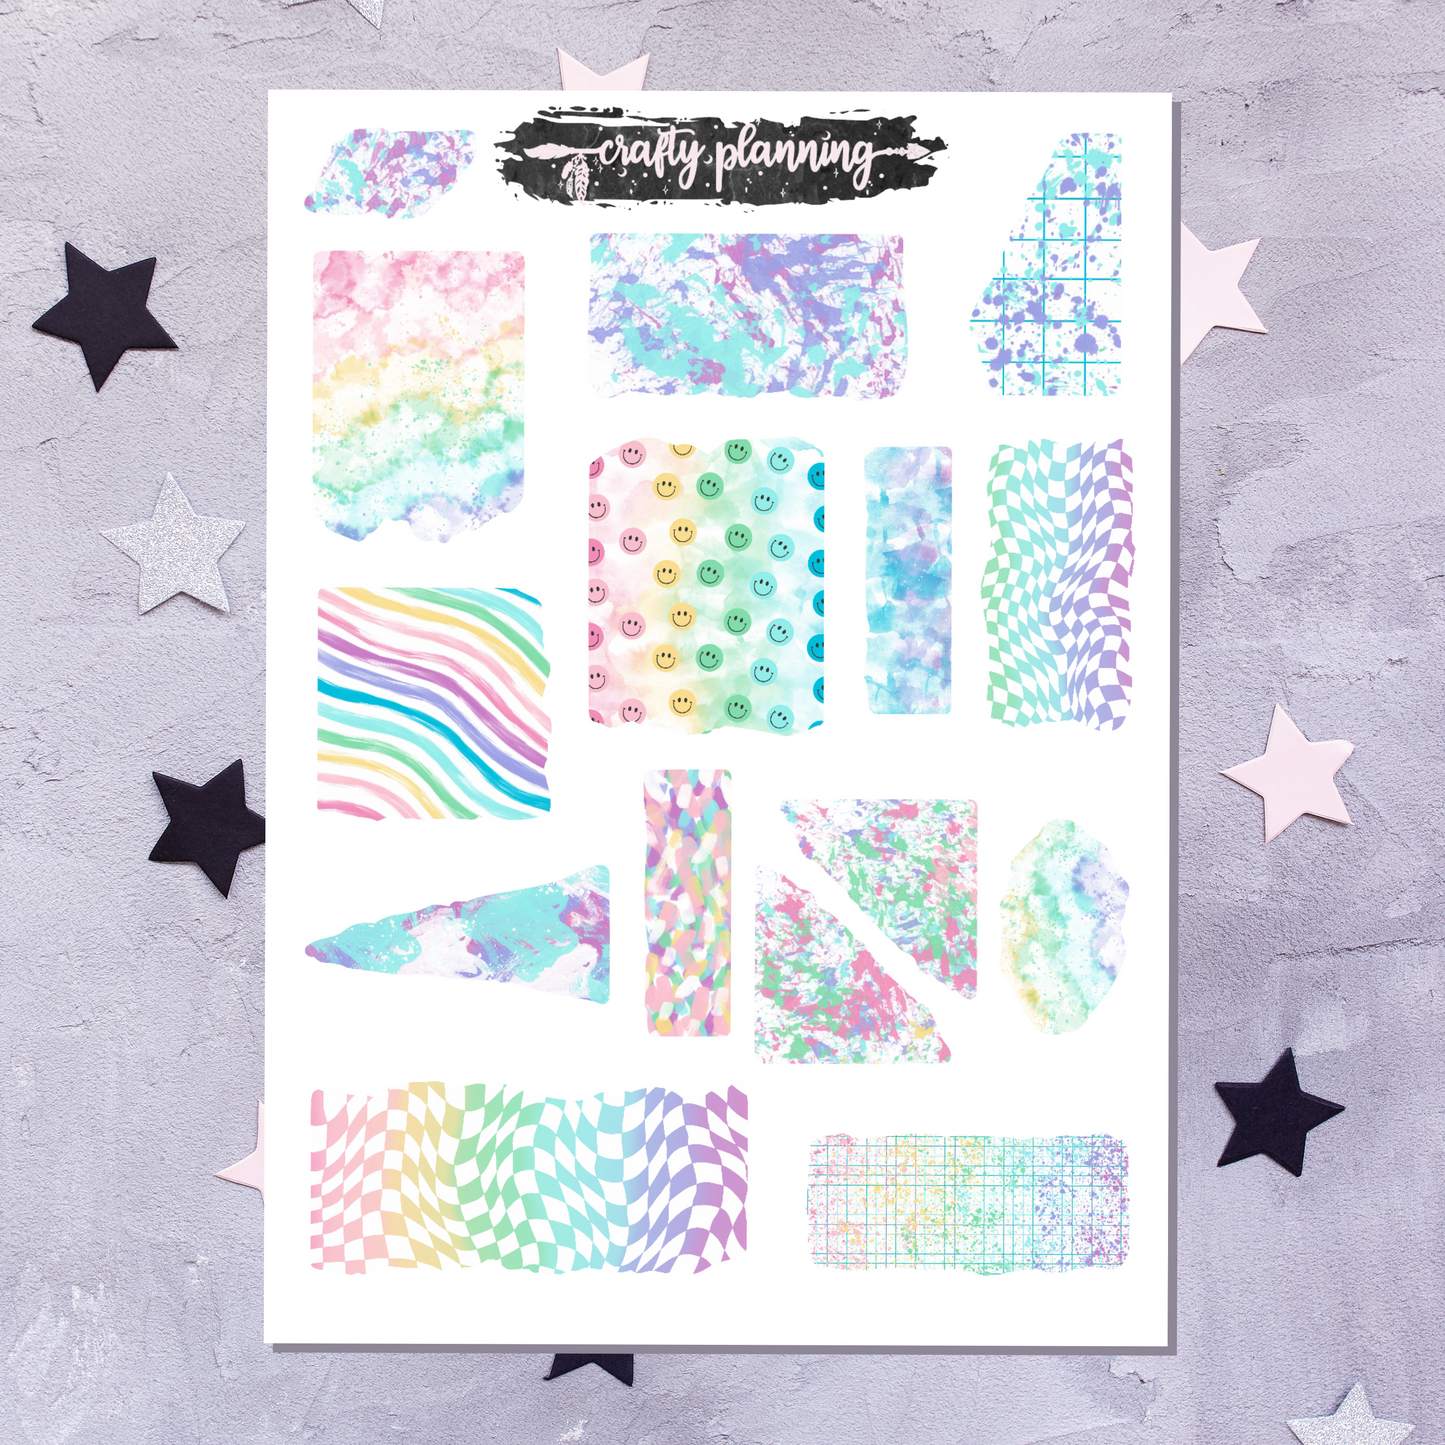 Torn Edge, Journal Stickers, Pride Stickers, Planner Stickers, Pastel Stickers, Rainbow Stickers, Bujo Stickers, Journal Kit